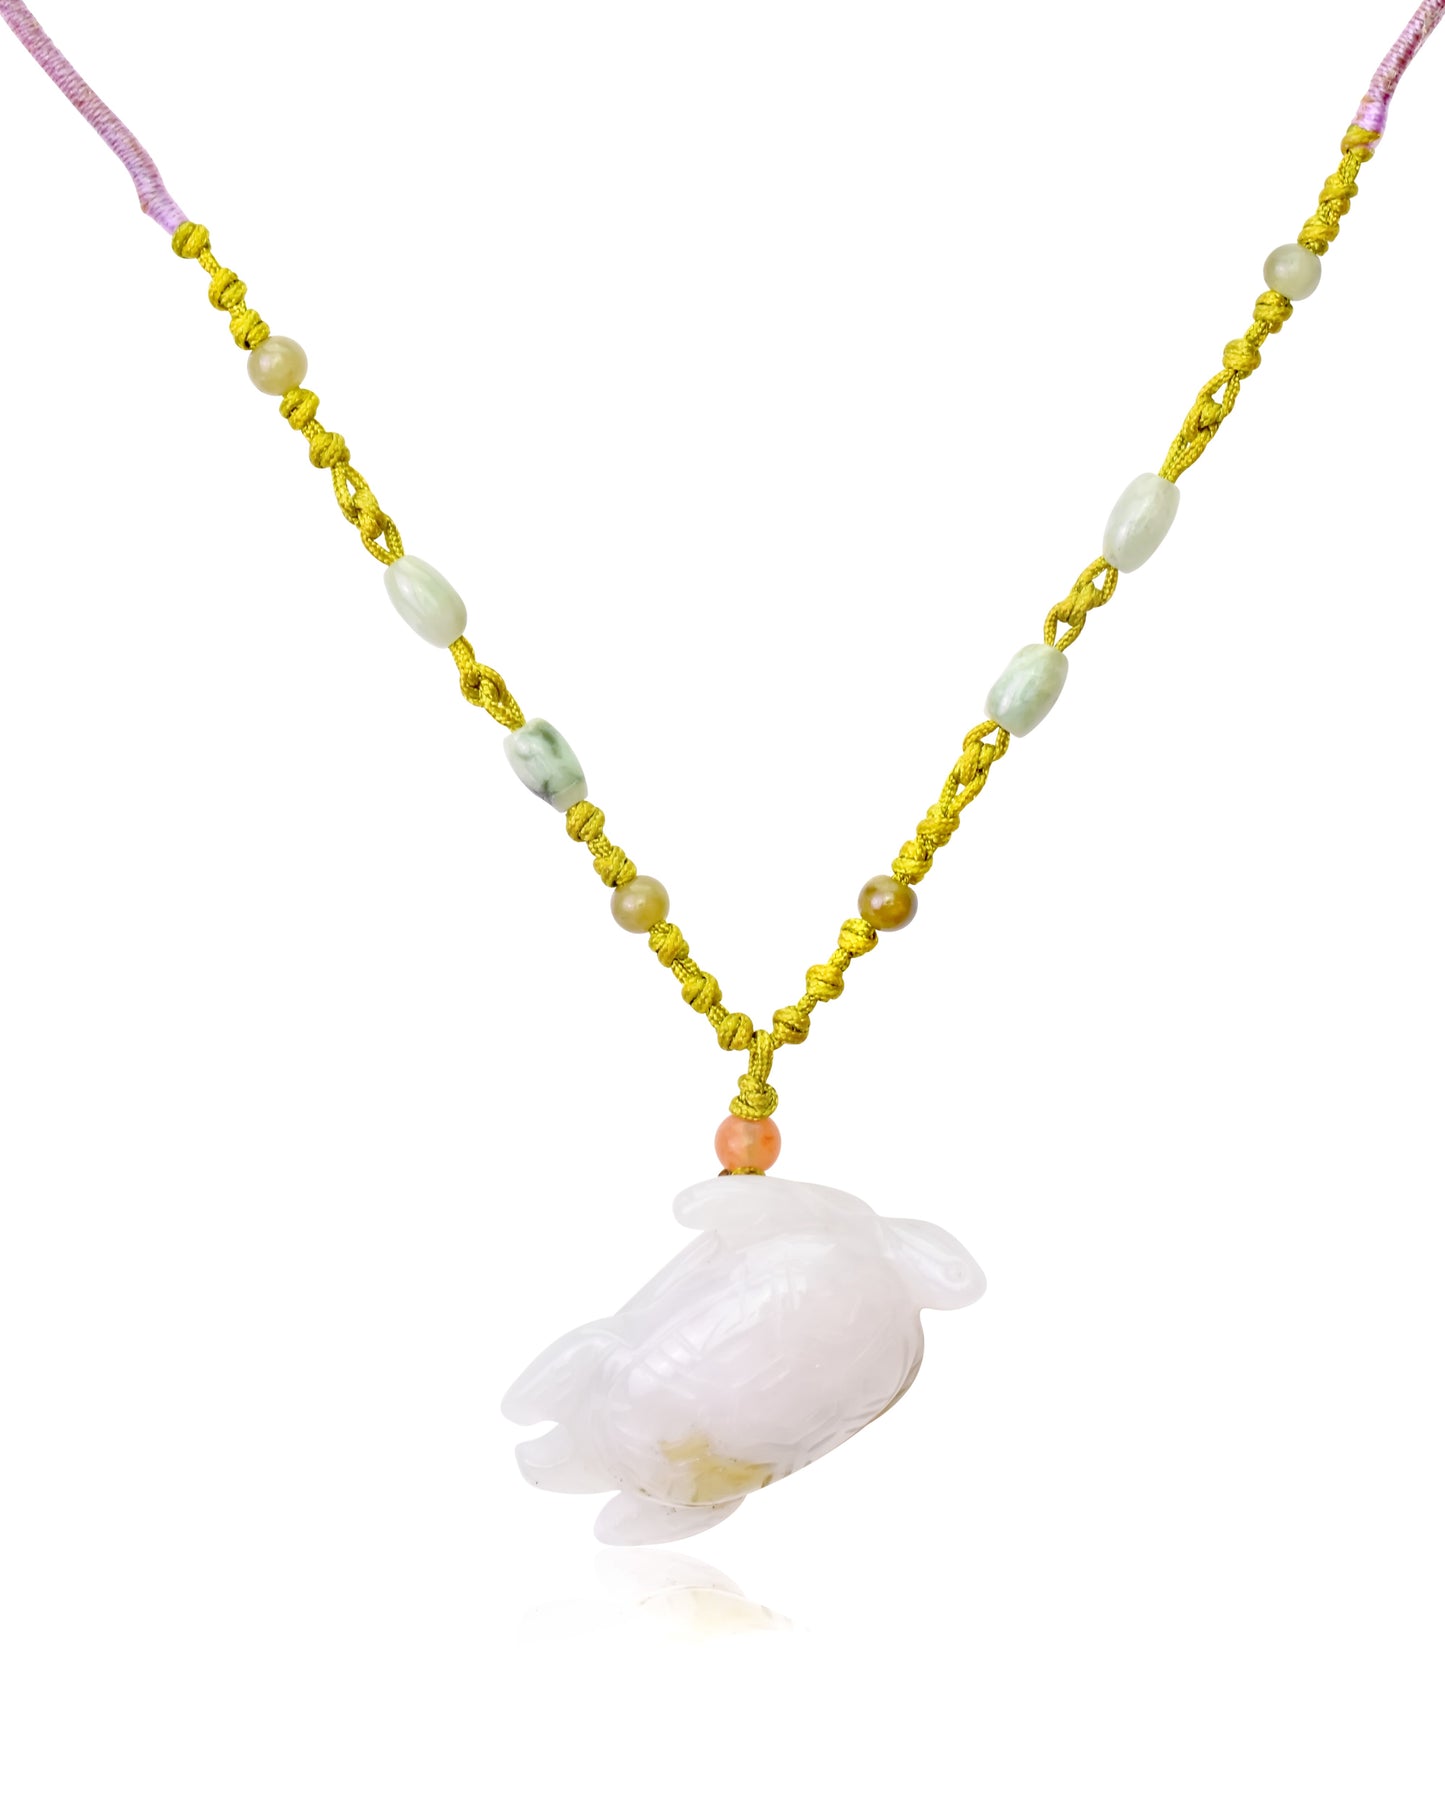 Get Good Luck and Spirituality with Turtle Jade Necklace made with Lime Cord